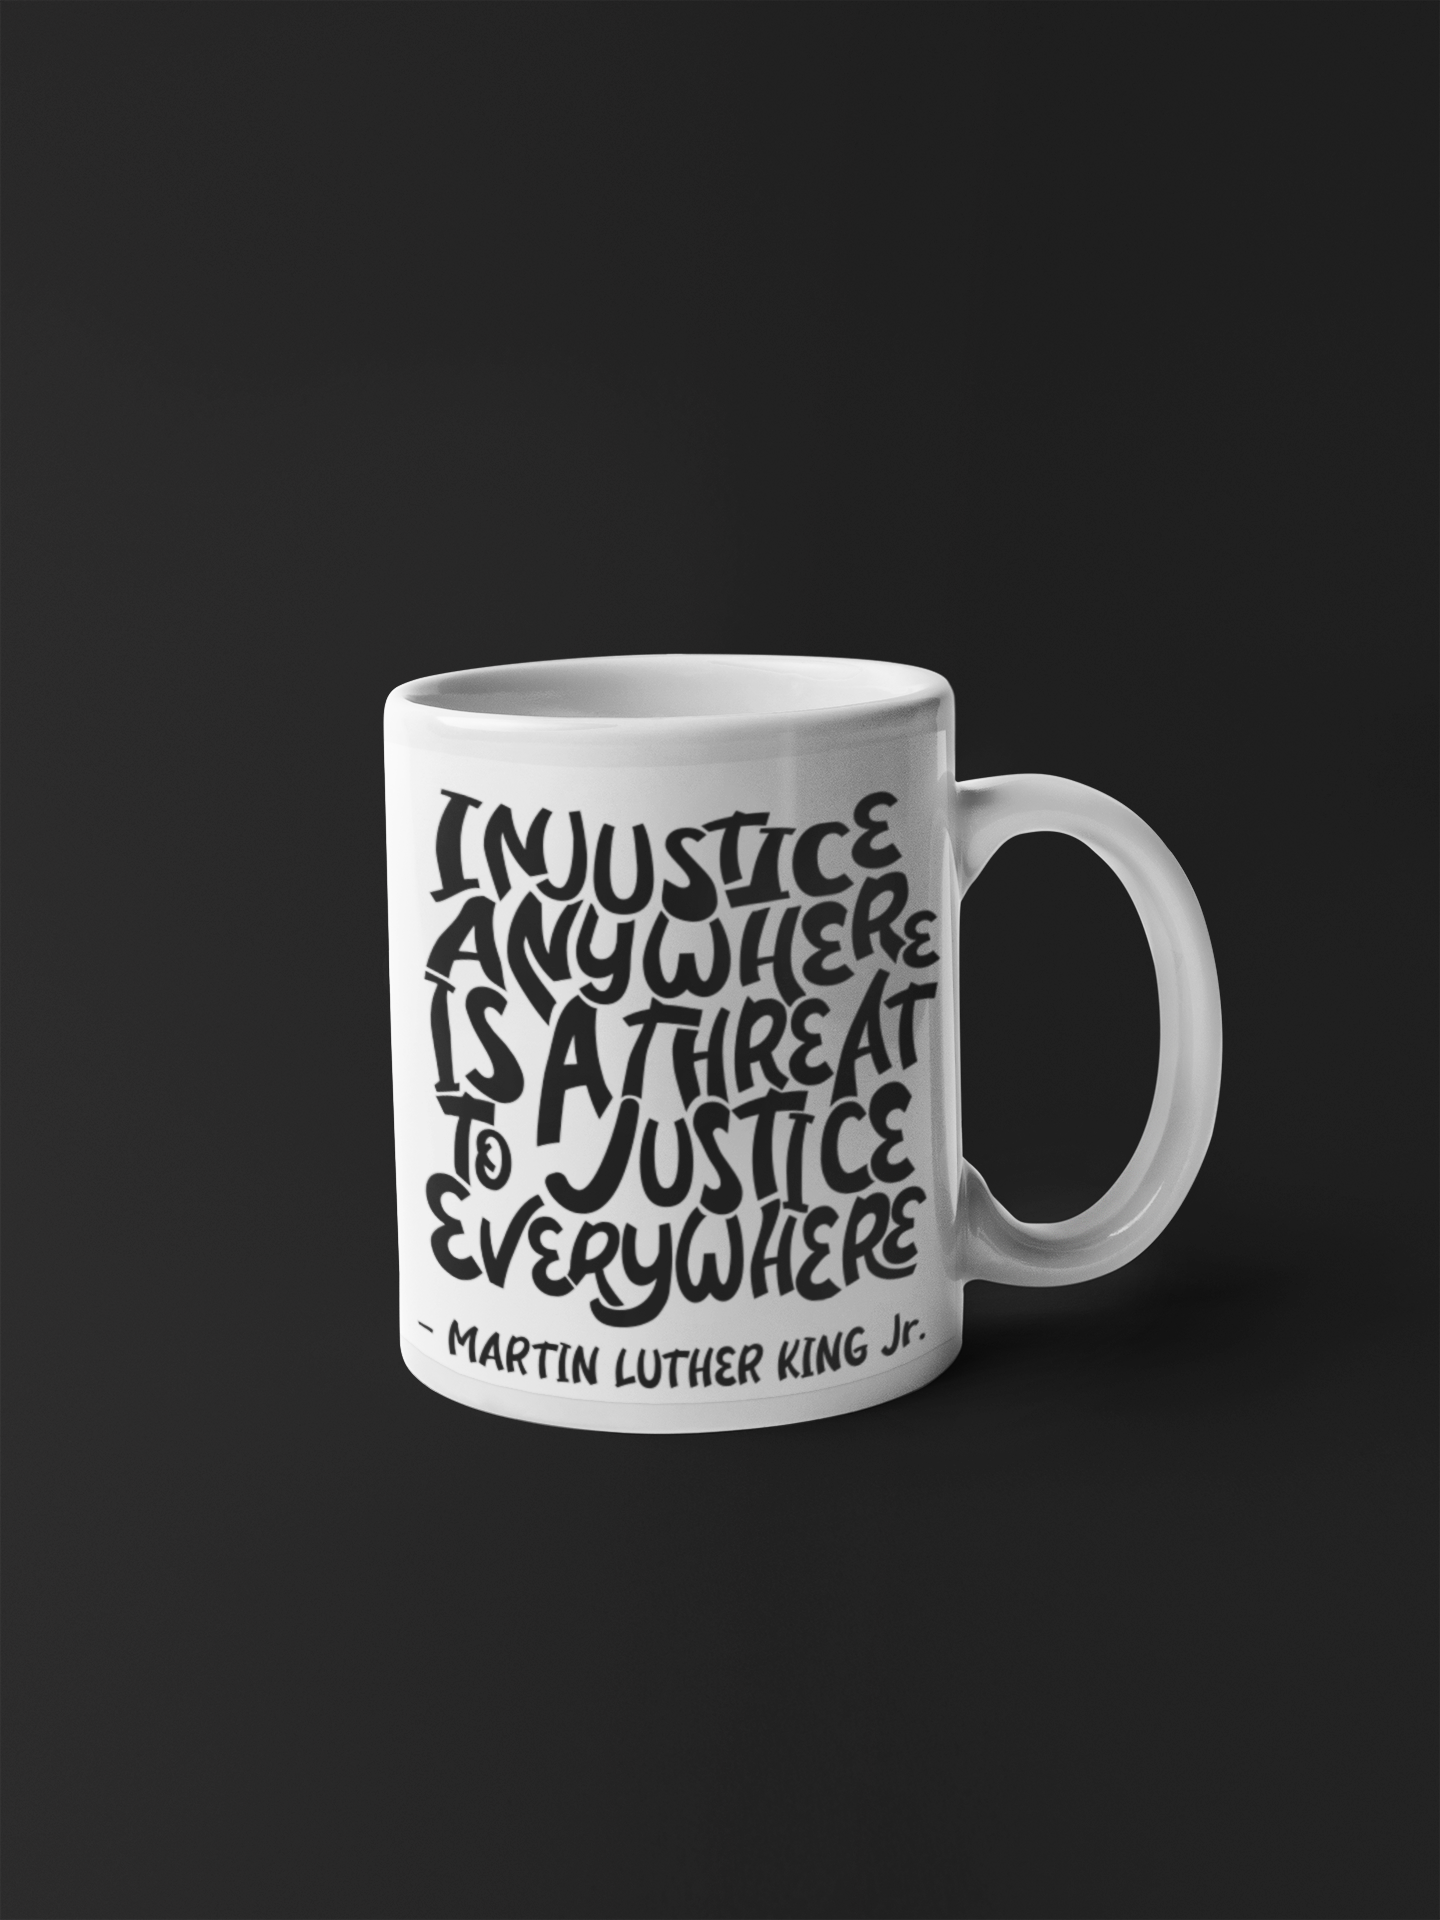 Mug Saying Injustice anywhere is a threat to justice everywhere